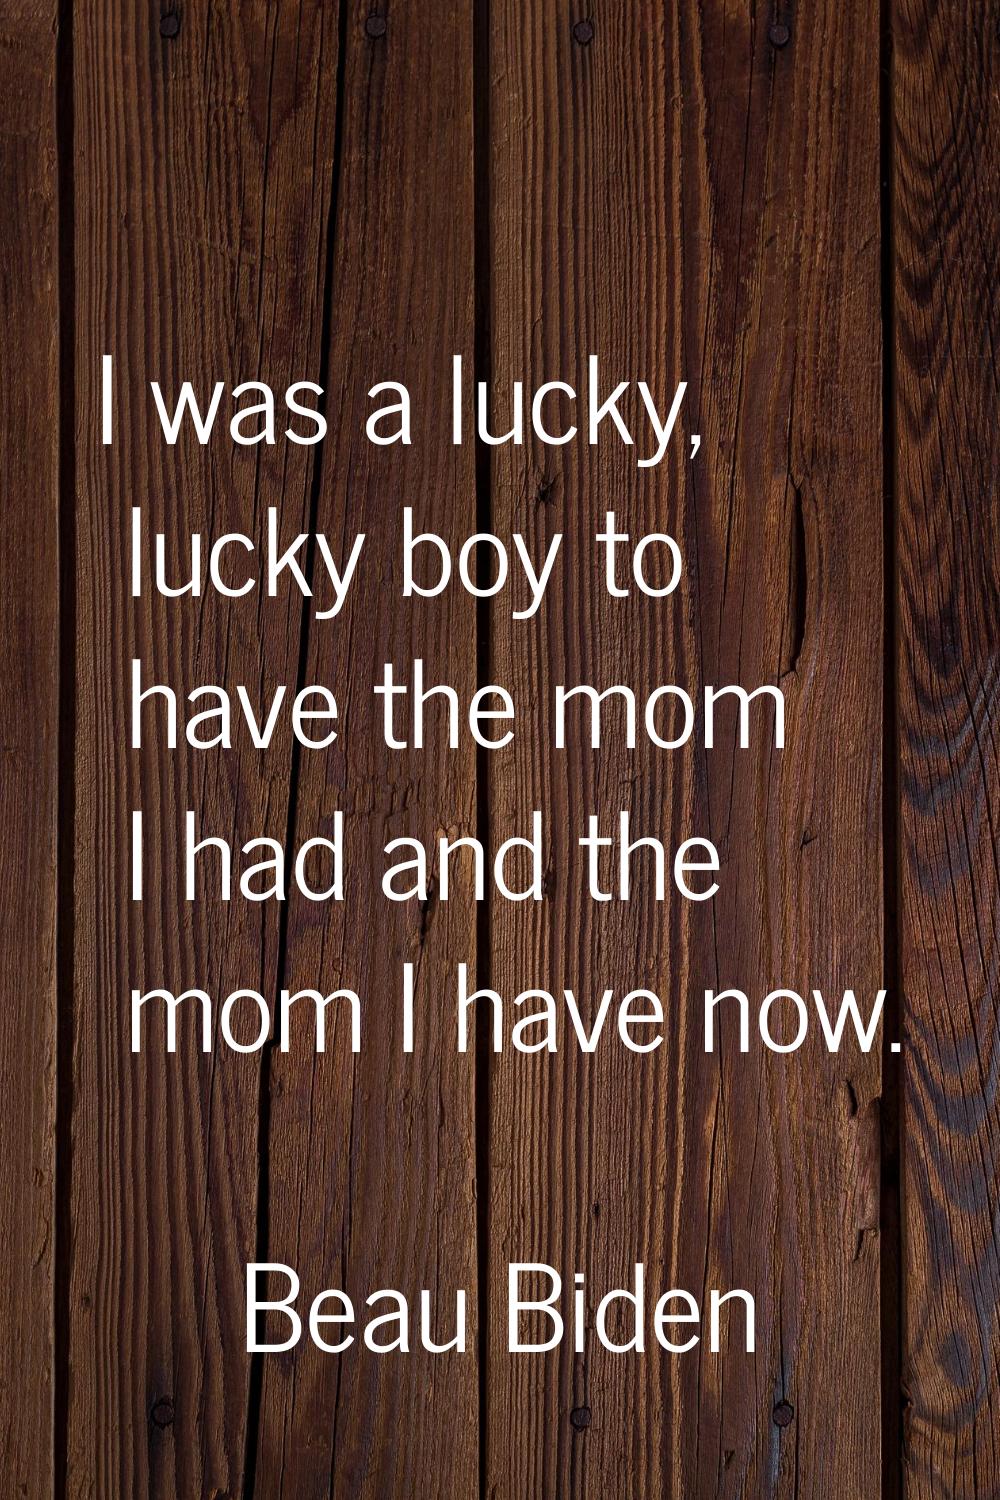 I was a lucky, lucky boy to have the mom I had and the mom I have now.